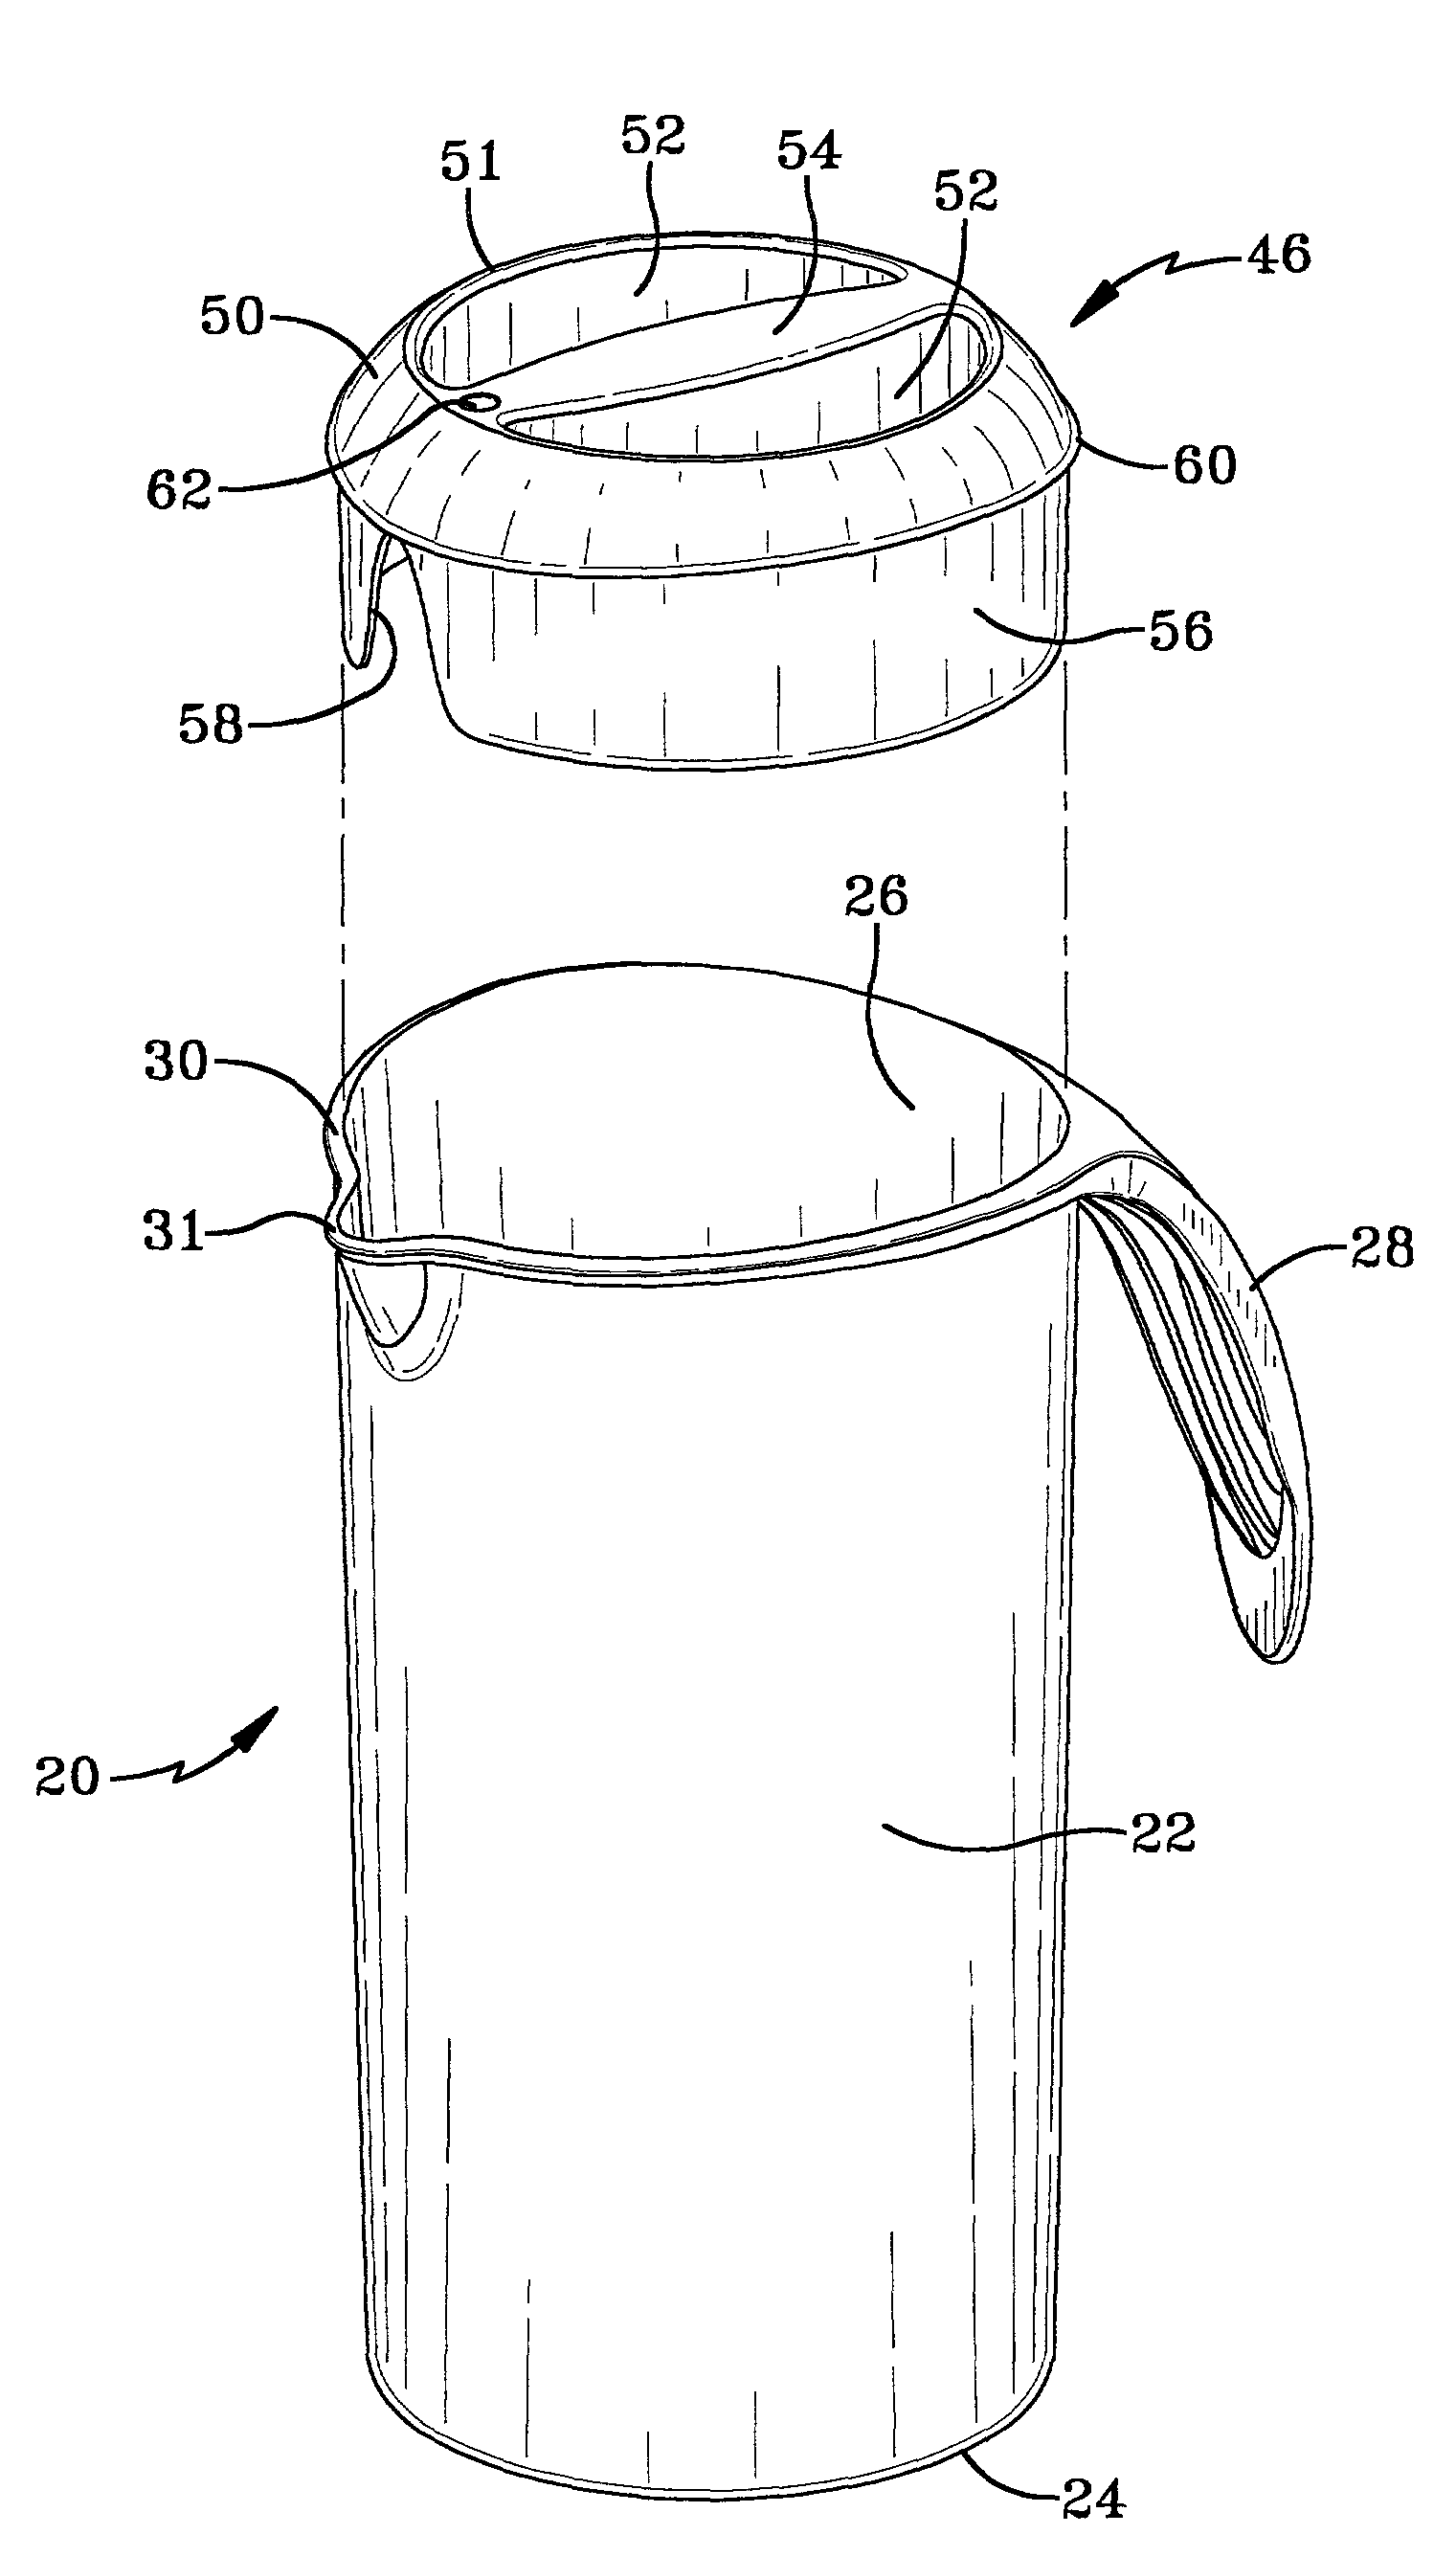 Combination bottle holder and pitcher type container